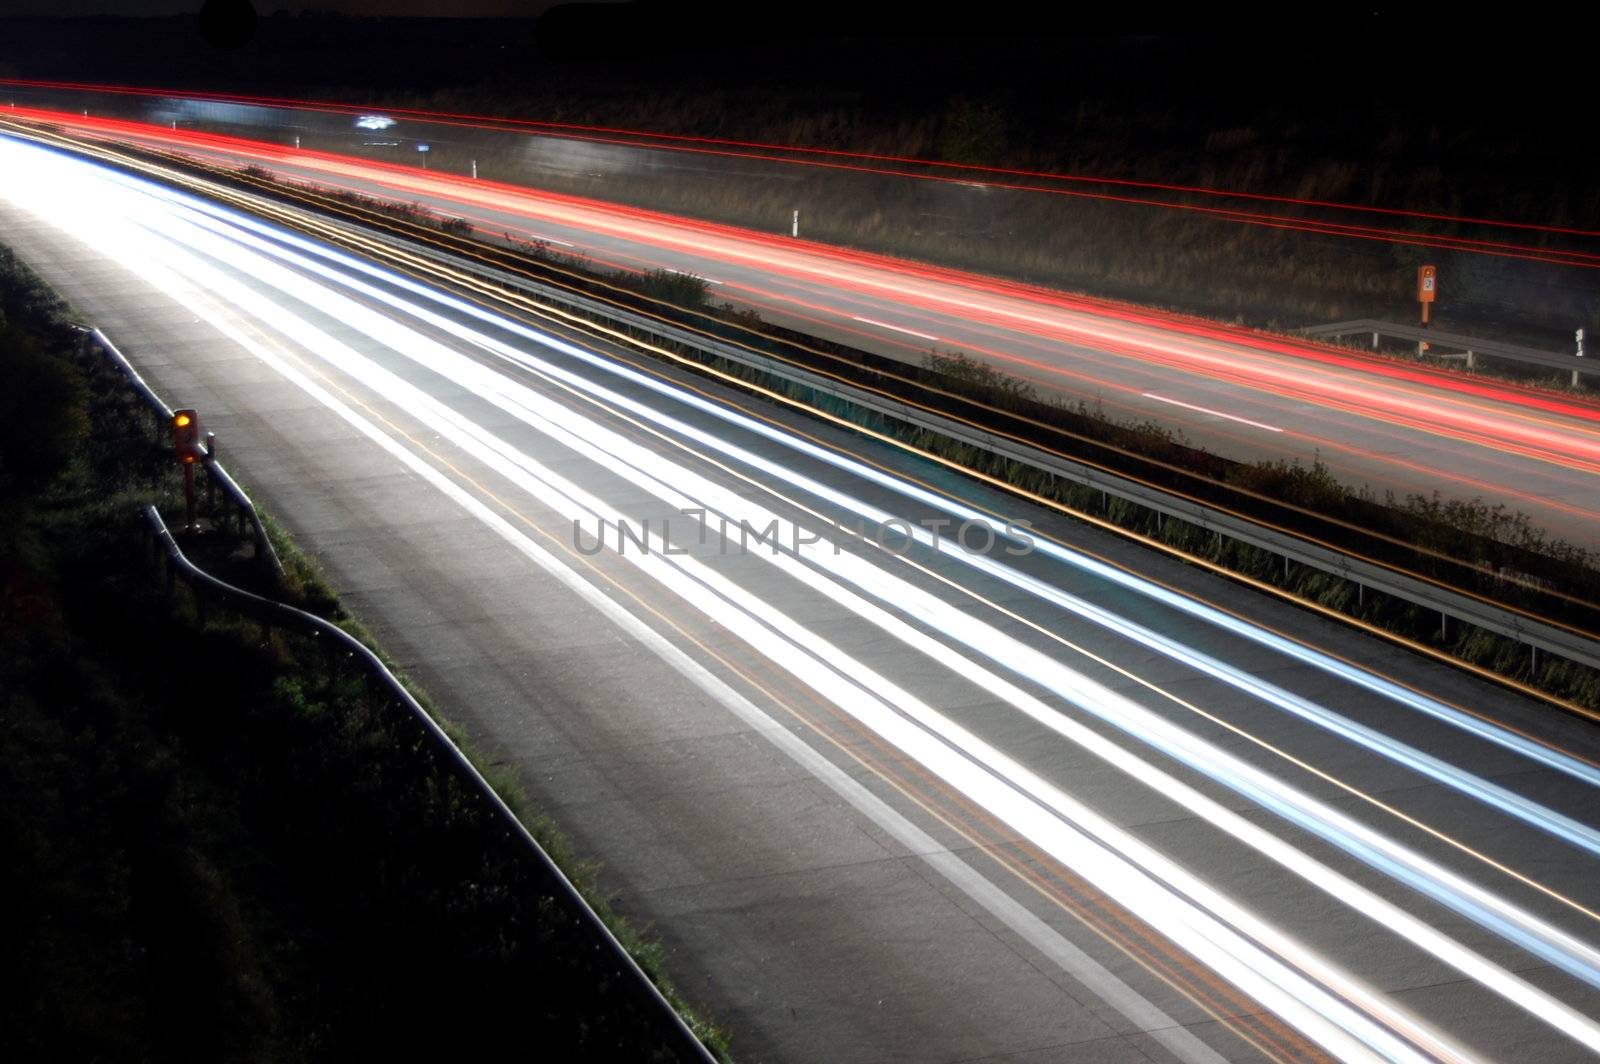 highway at night with car traffic and lights